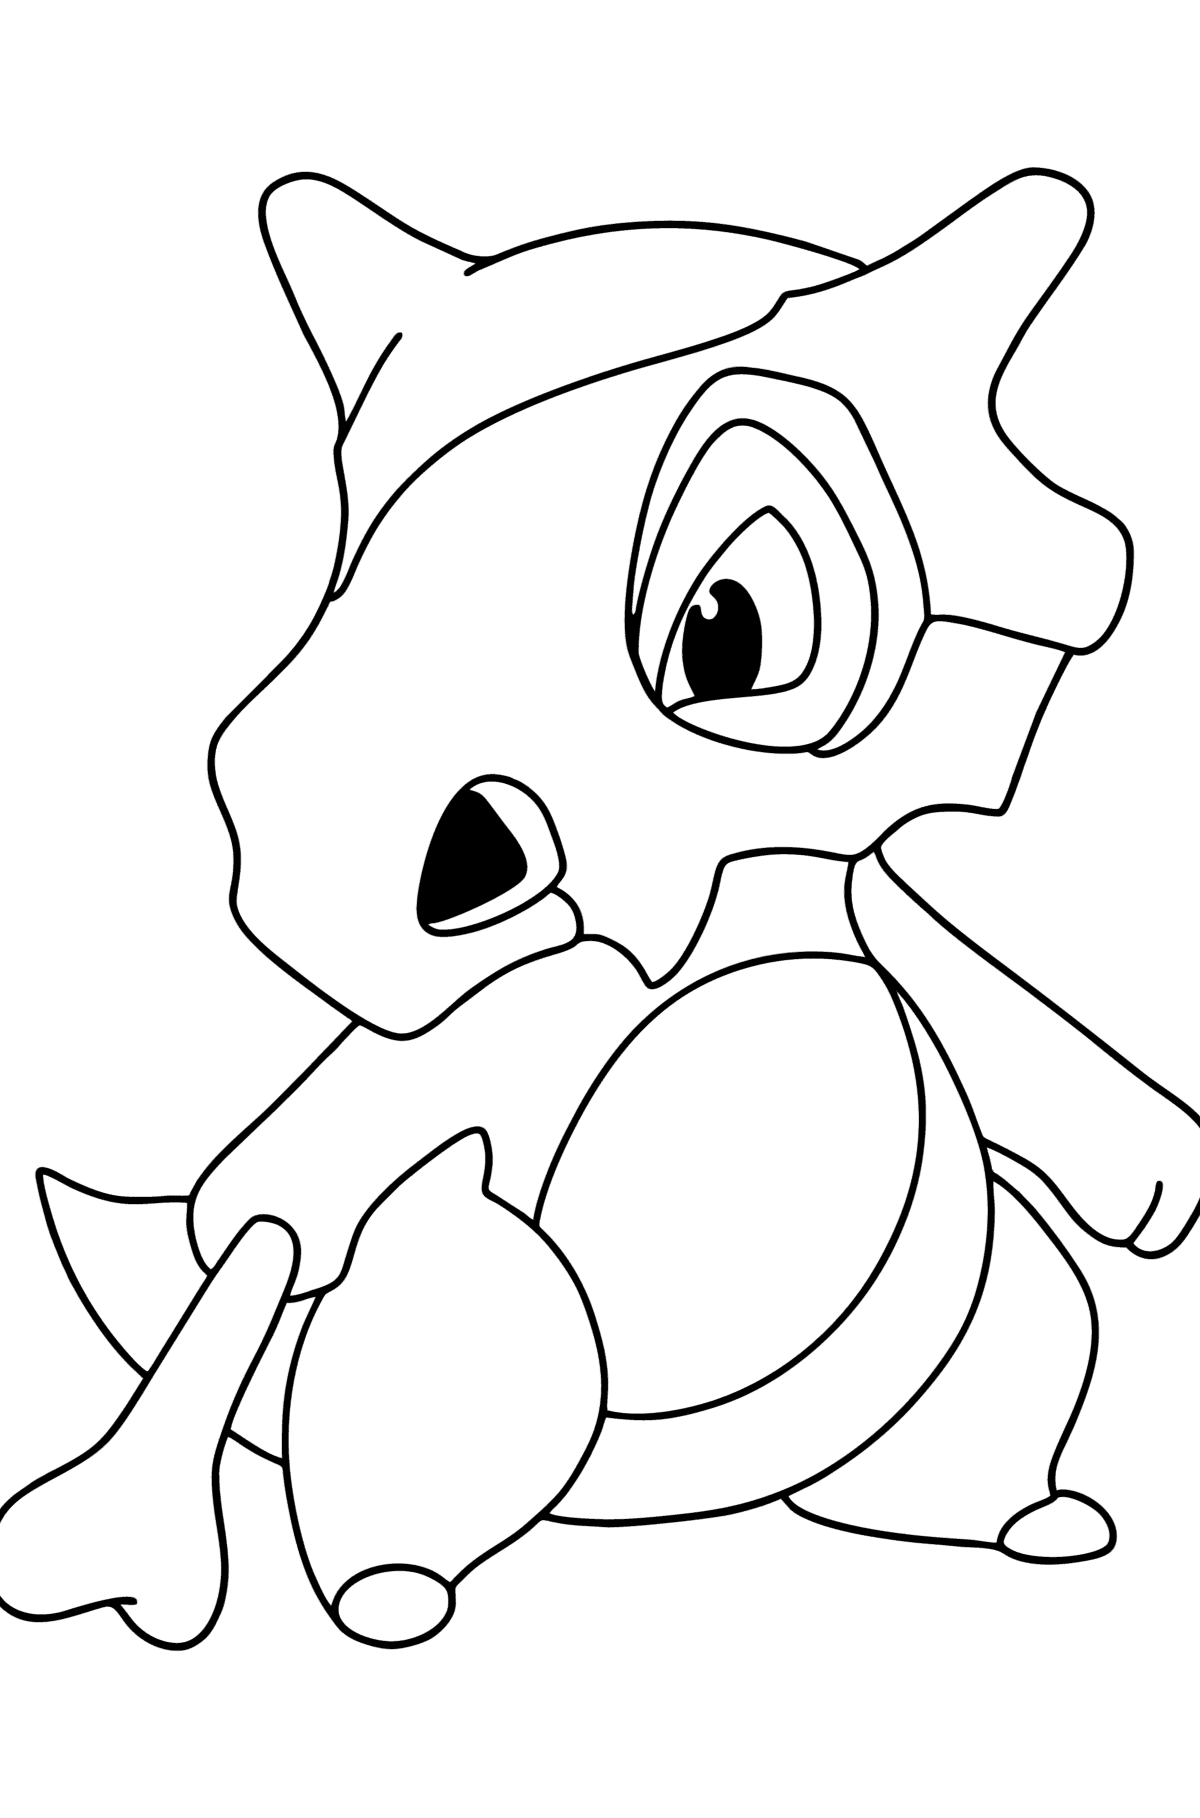 Coloring page Pokemon Go Cubone - Coloring Pages for Kids